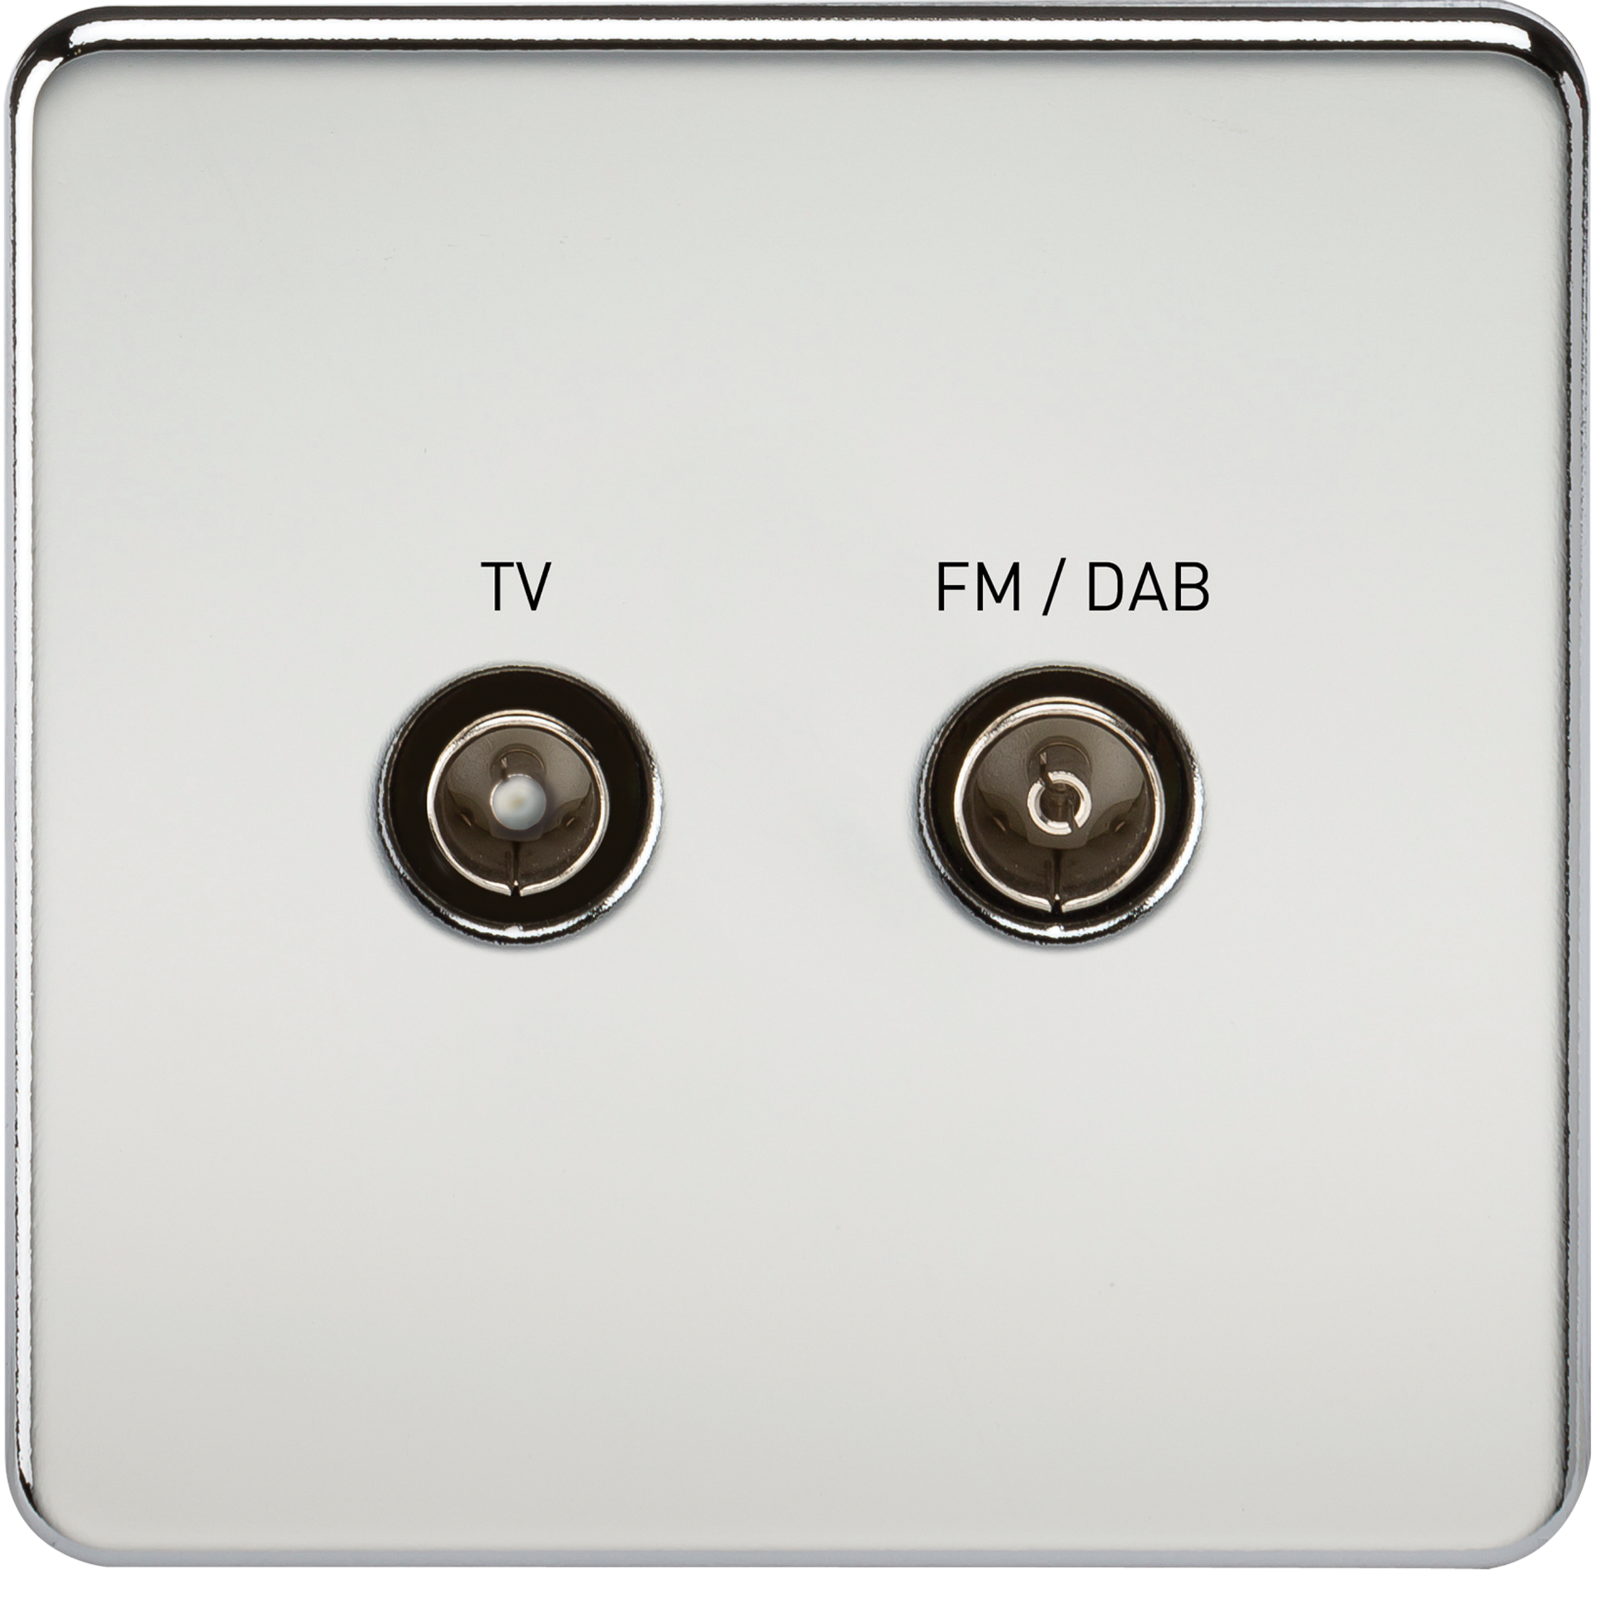 Screwless Screened Diplex Outlet (TV & FM DAB) - Polished Chrome - SF0160PC 